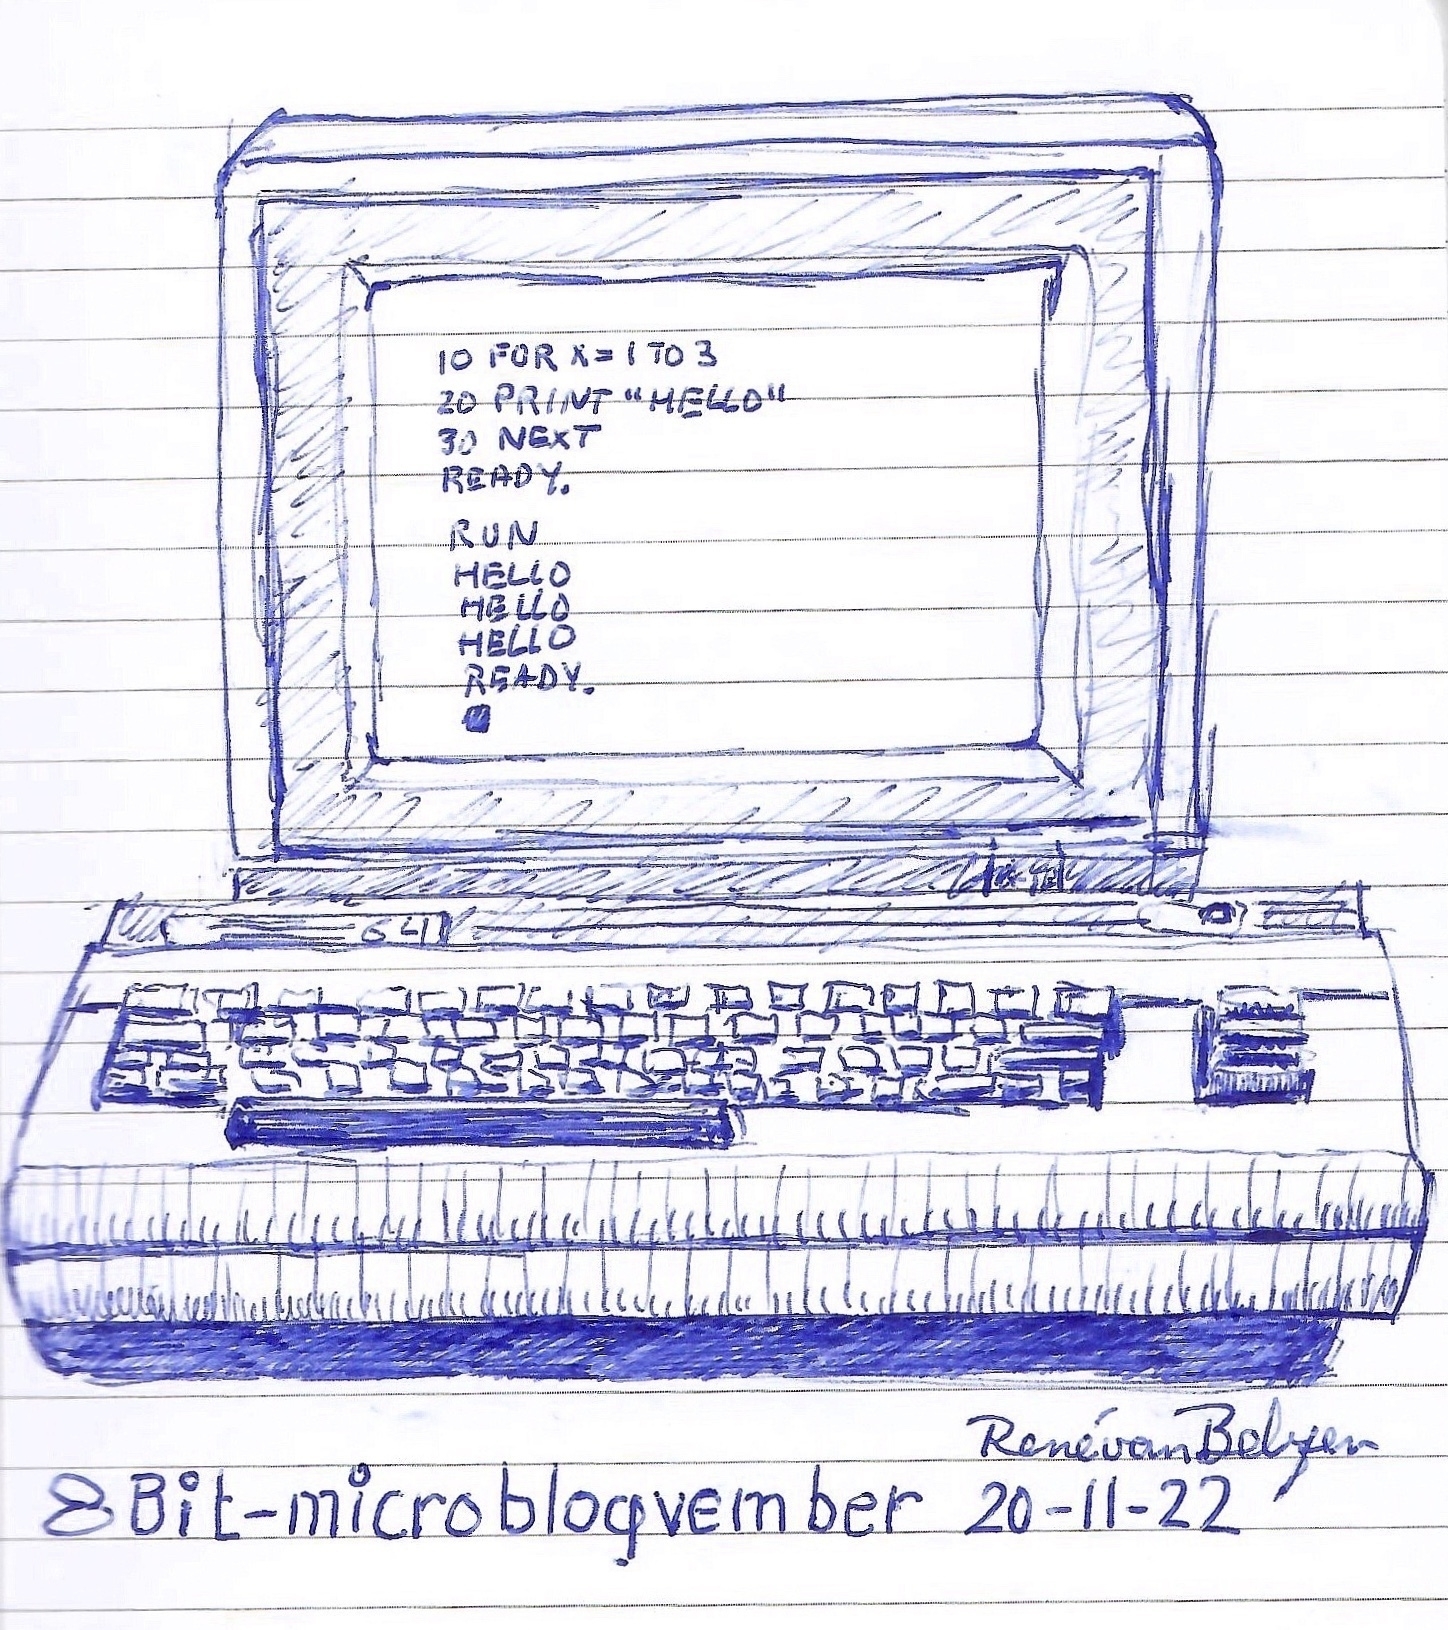 ballpoint sketch of Commodore 64 computer and monitor, displaying basic program and its output from a for-next loop